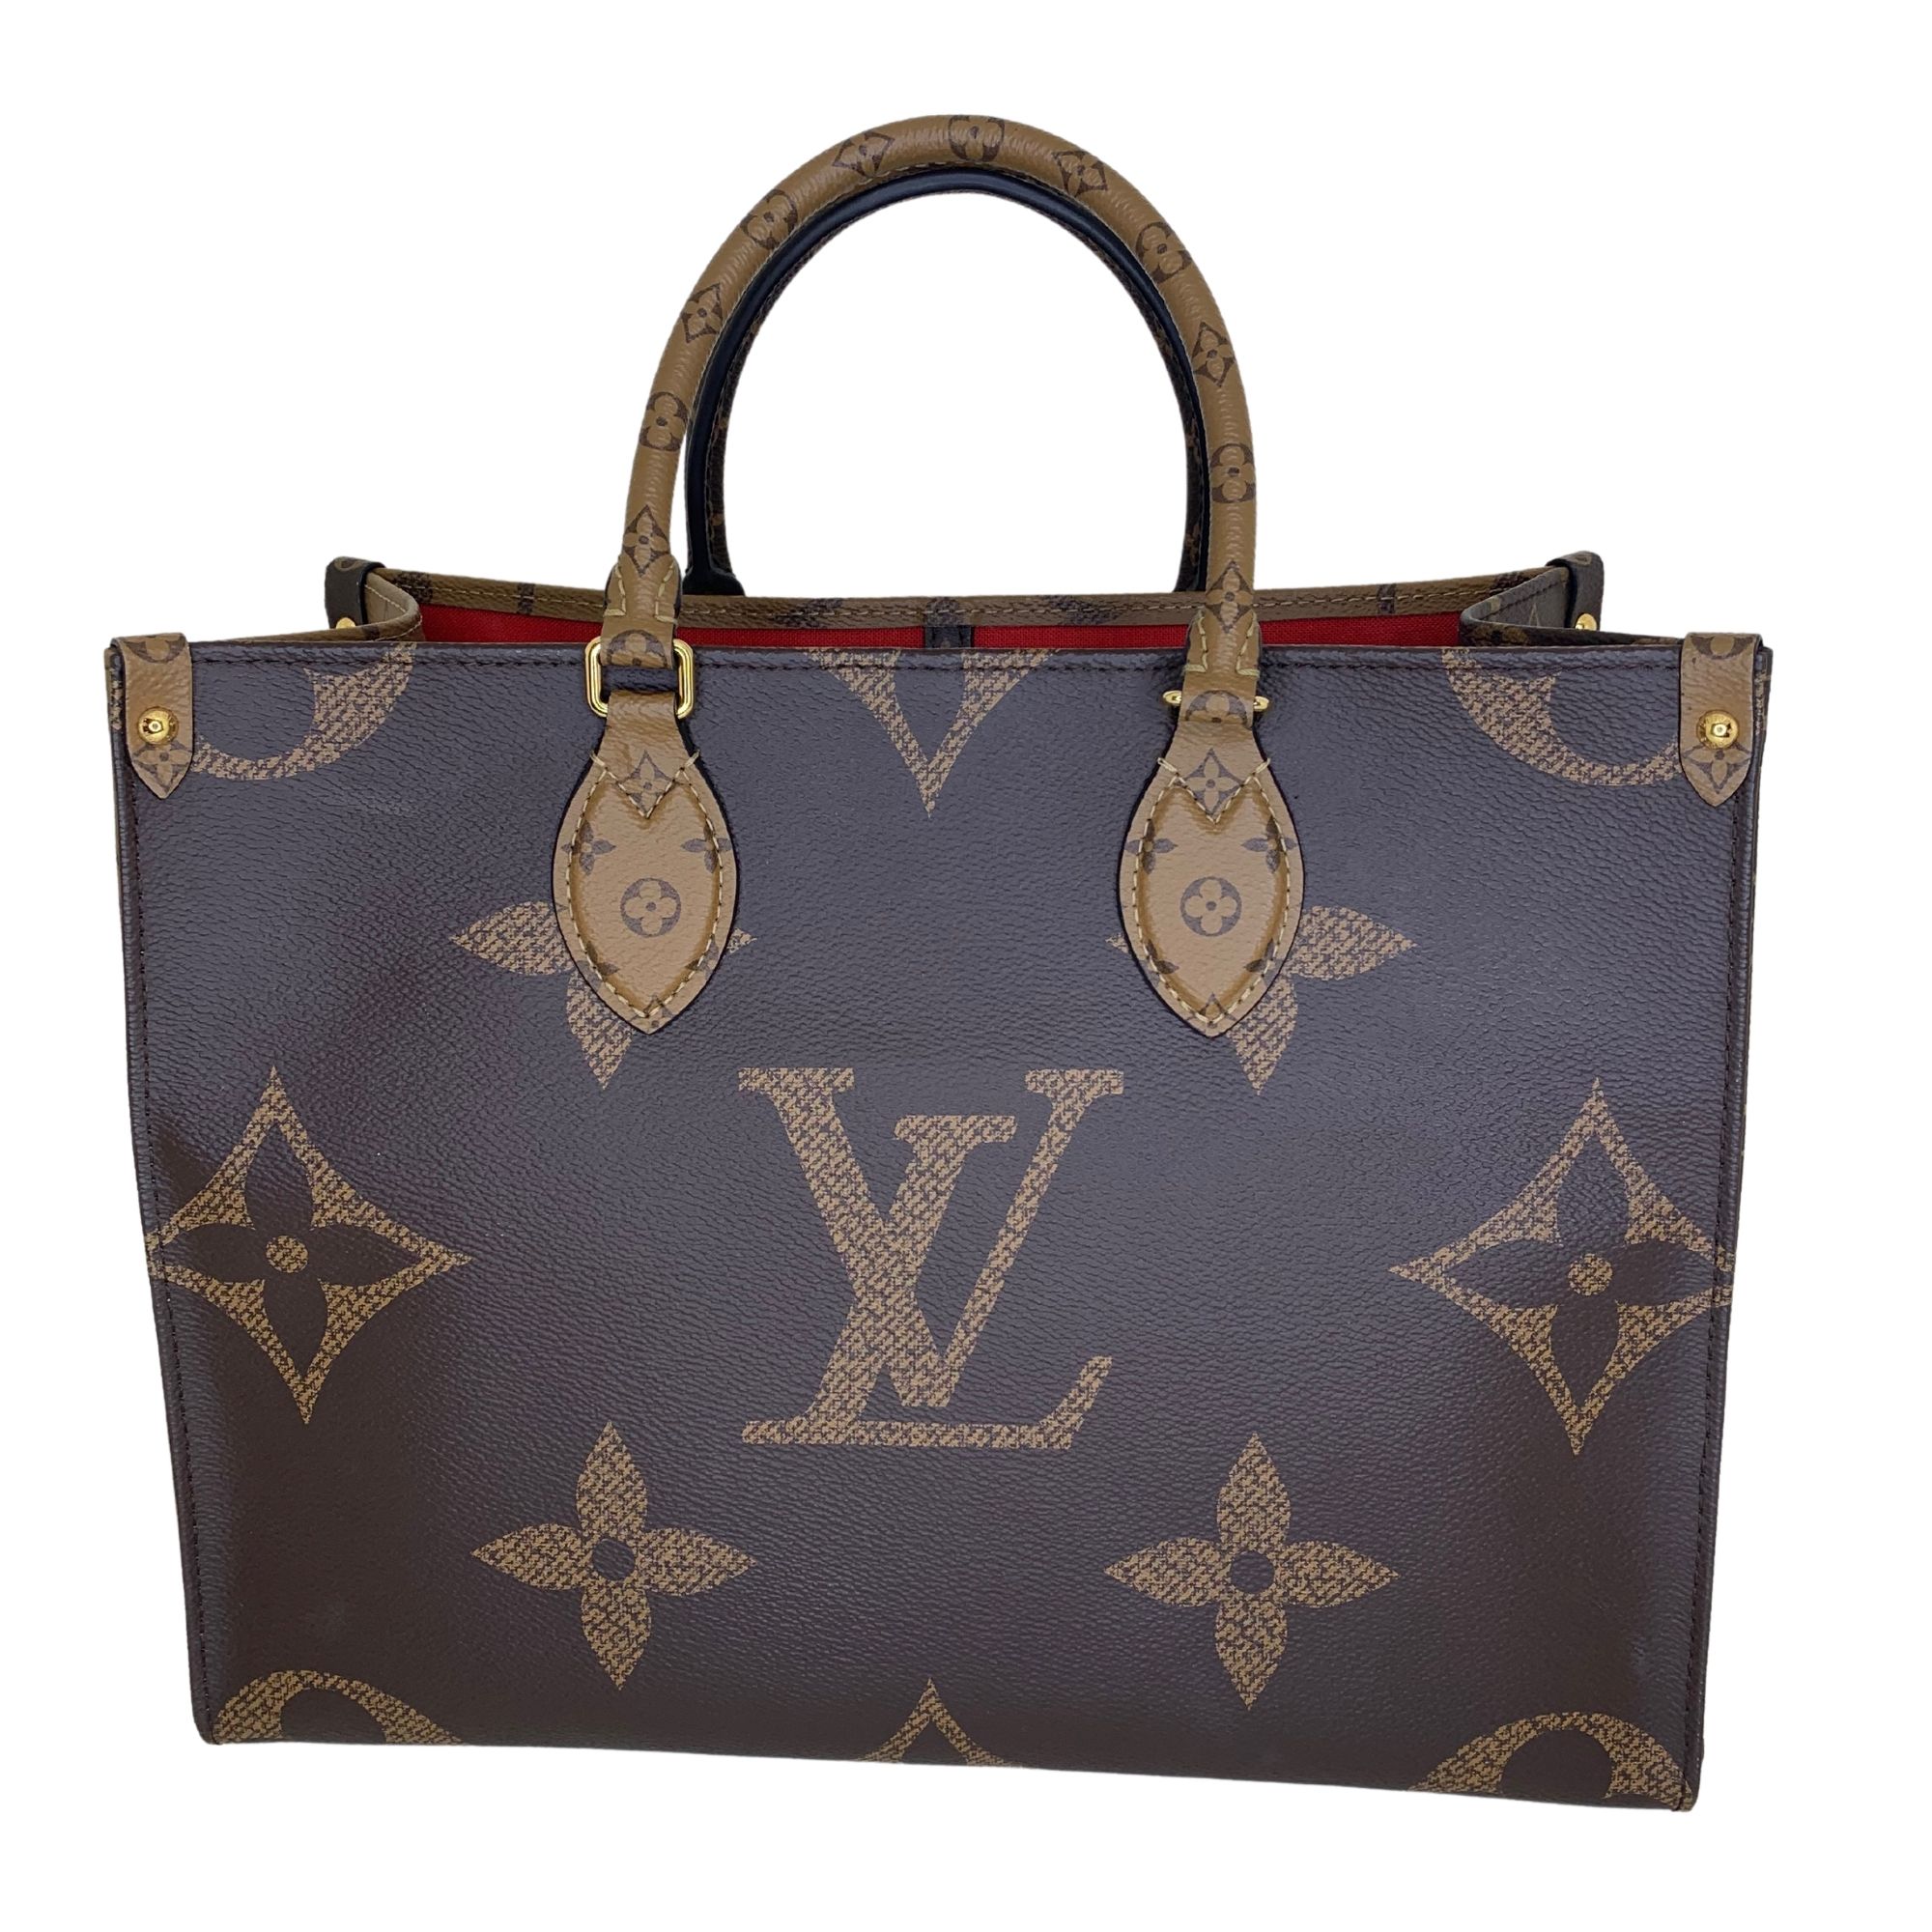  LOUIS VUITTON M44576 On the Go GM Monogram Giant Shoulder Bag  Tote Bag Monogram Canvas Women New Used : Clothing, Shoes & Jewelry